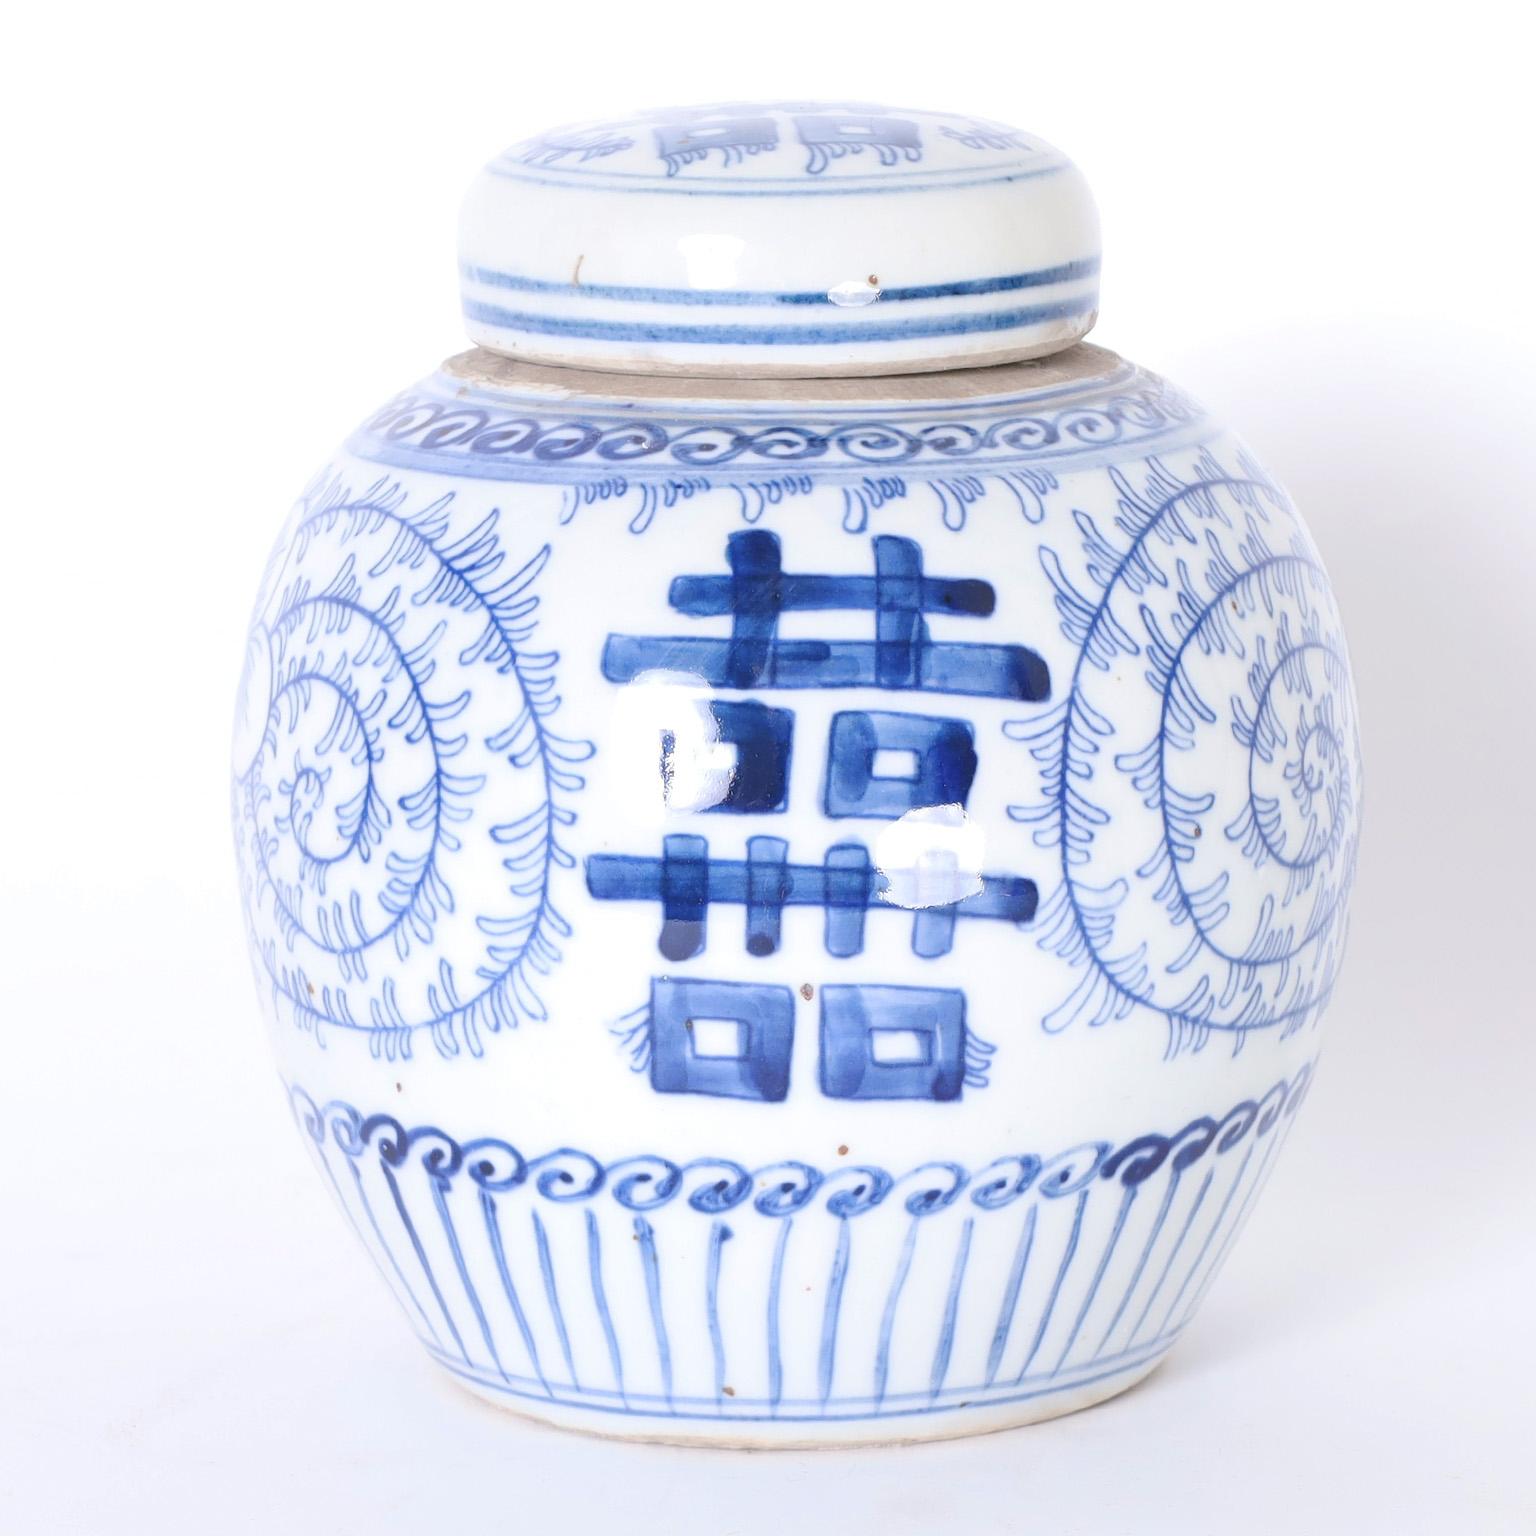 Pair of Chinese Blue and White Porcelain Double Happiness Tea Caddies In Good Condition For Sale In Palm Beach, FL